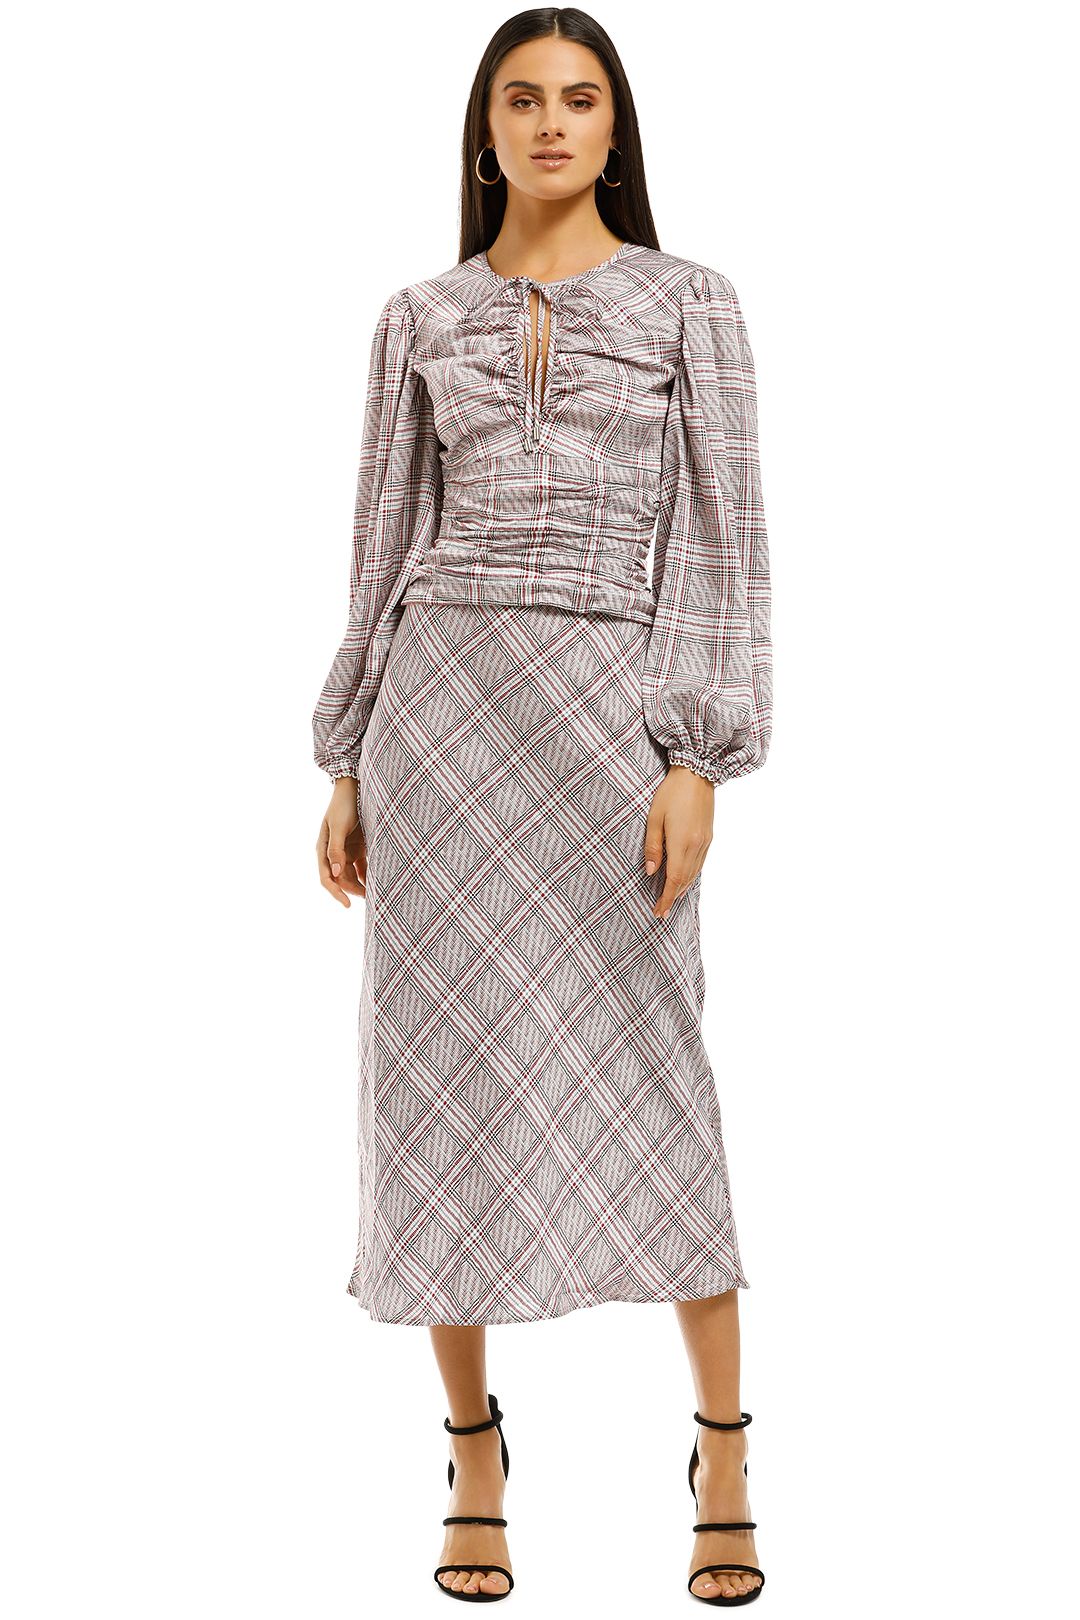 CMEO-Collective-No-Time-Skirt-Plaid-Front